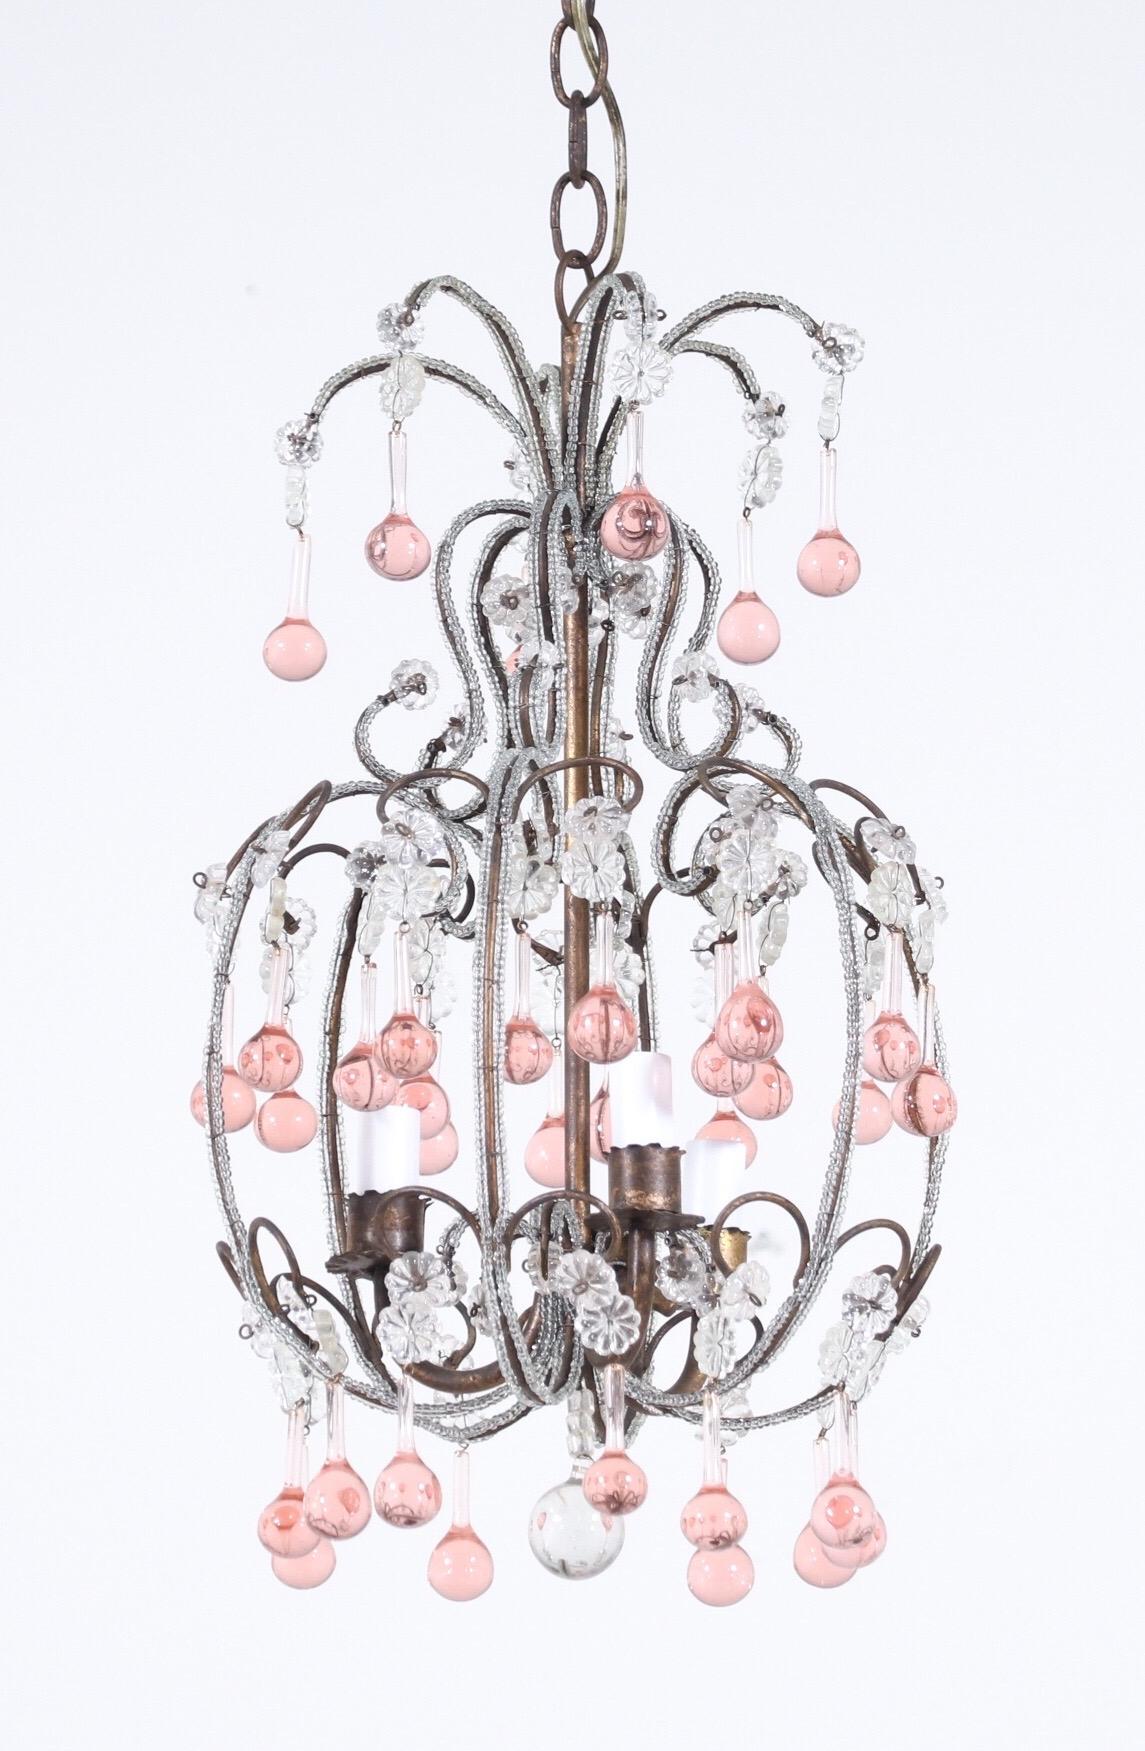 Beautiful, 1950s Italian gilt-iron and crystal beaded chandelier with pink Murano drops.

The chandelier consists of crystal beaded scrolled and gilded iron frame with pink Murano glass drops. The chandelier is wired and in working condition.